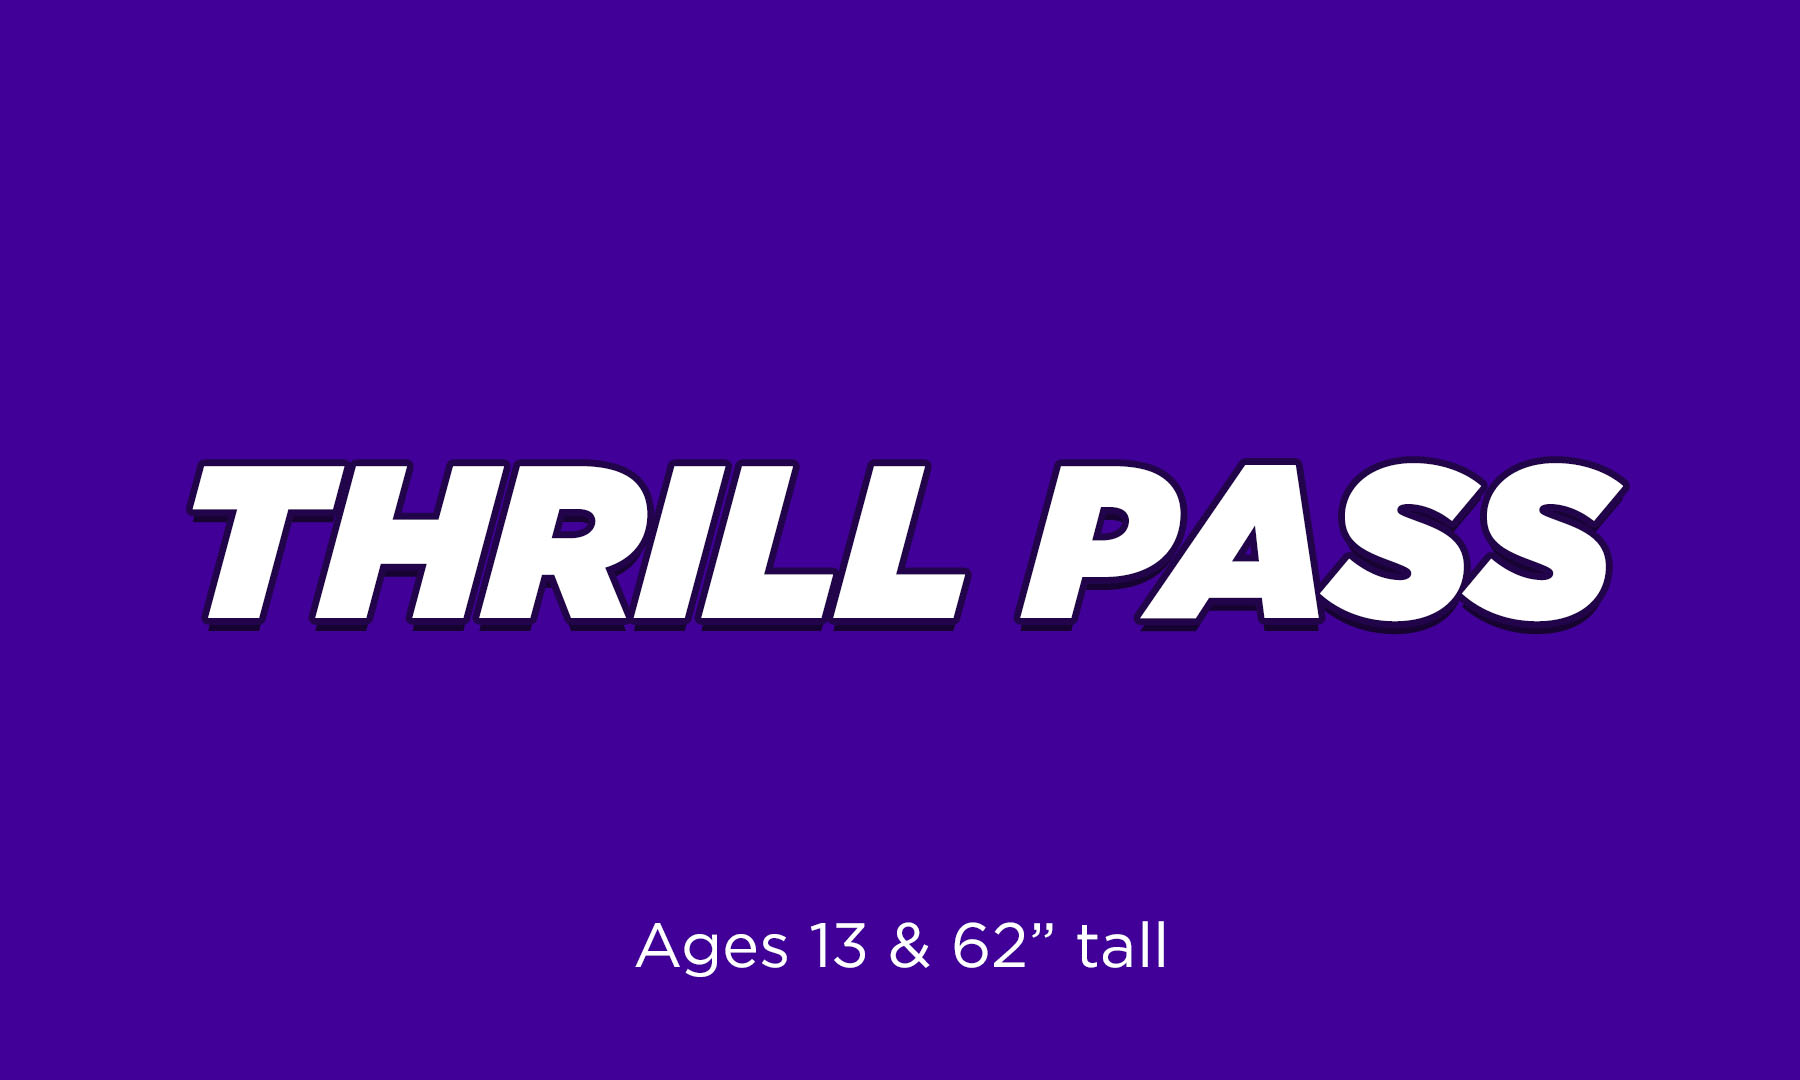 Thrill Pass is only available in house